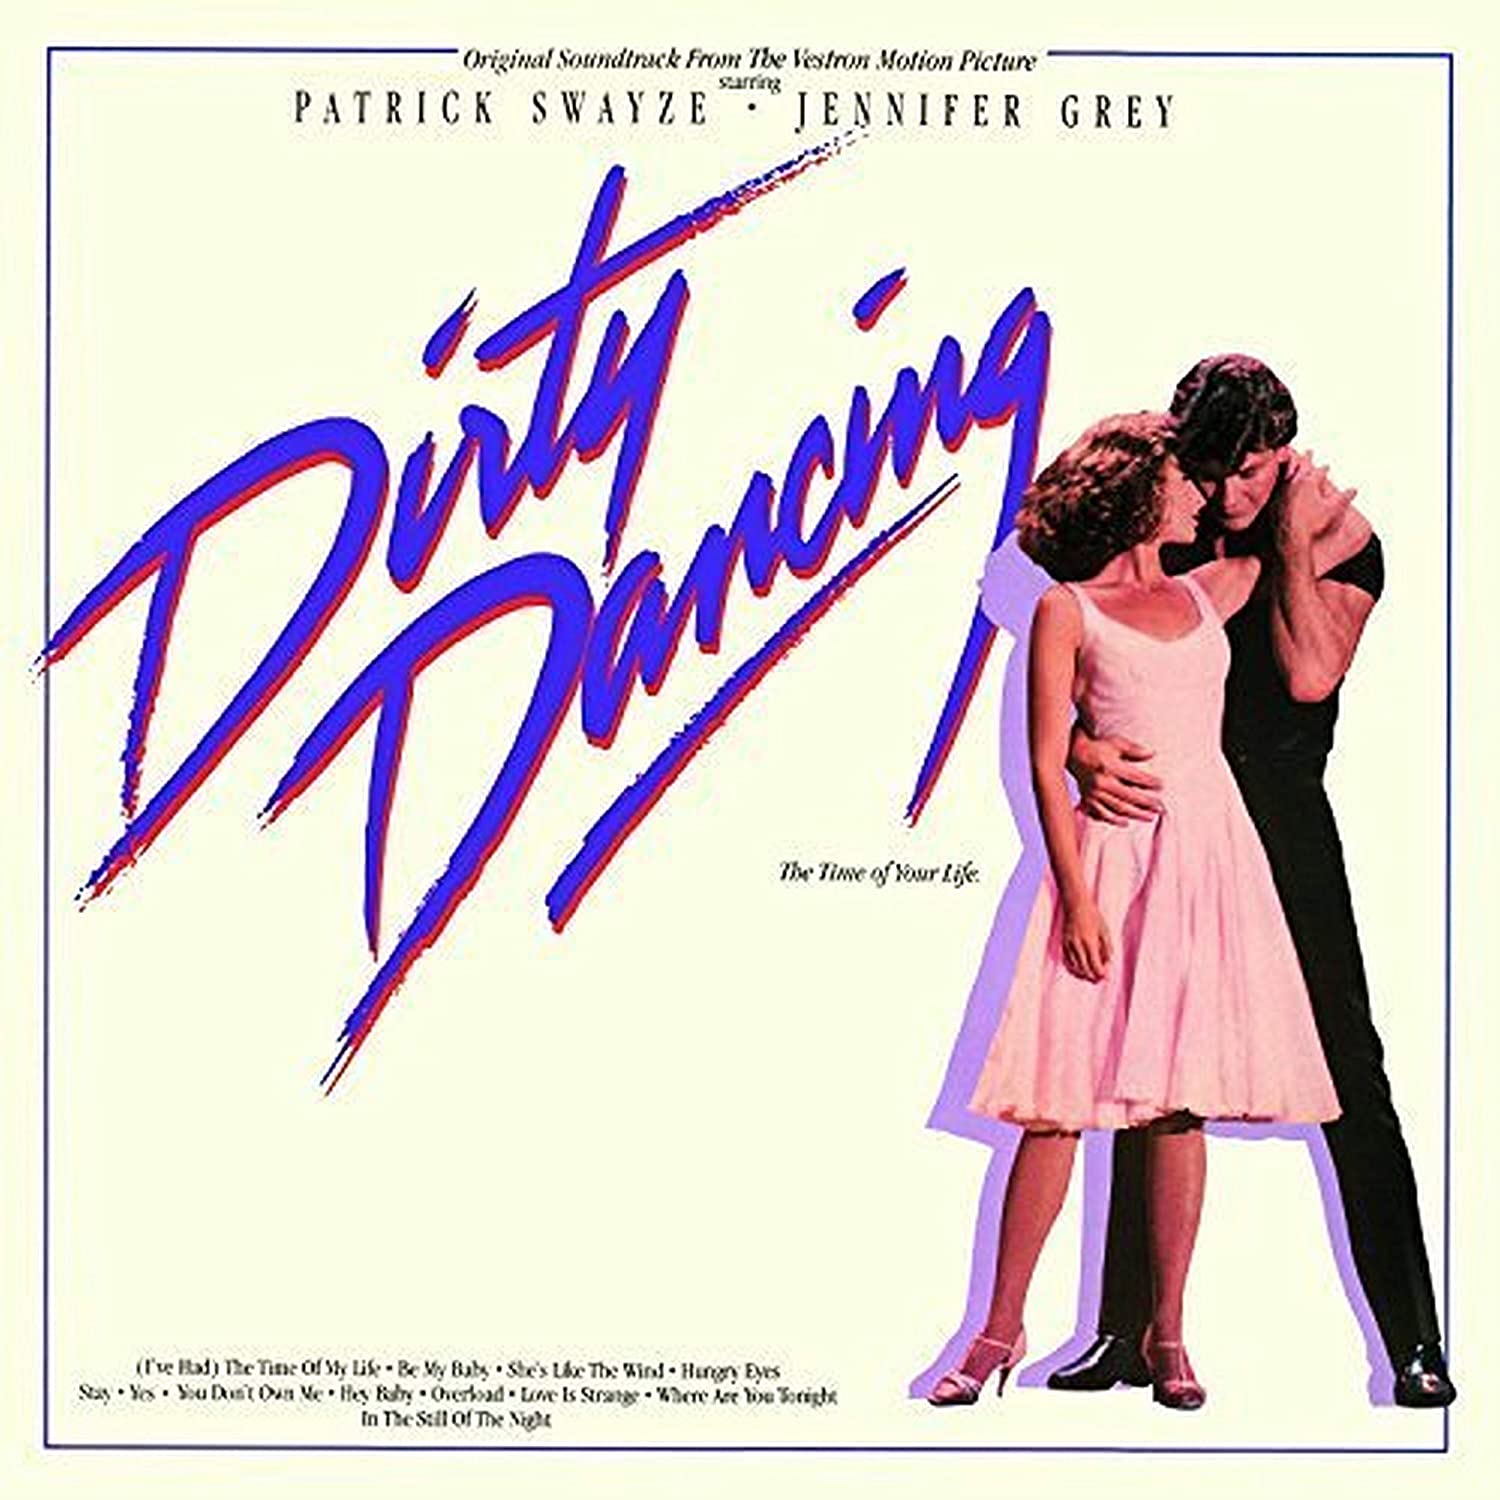 Have the time of your life with the unforgettable soundtrack to Dirty Dancing! This classic album topped the charts for 18 weeks in 1987 and 1988 thanks to hits like Bill Medley and Jennifer Warnes' "(I ve Had) The Time of My Life," Eric Carmen's "Hungry Eyes" and Patrick Swayze's "She's Like the Wind